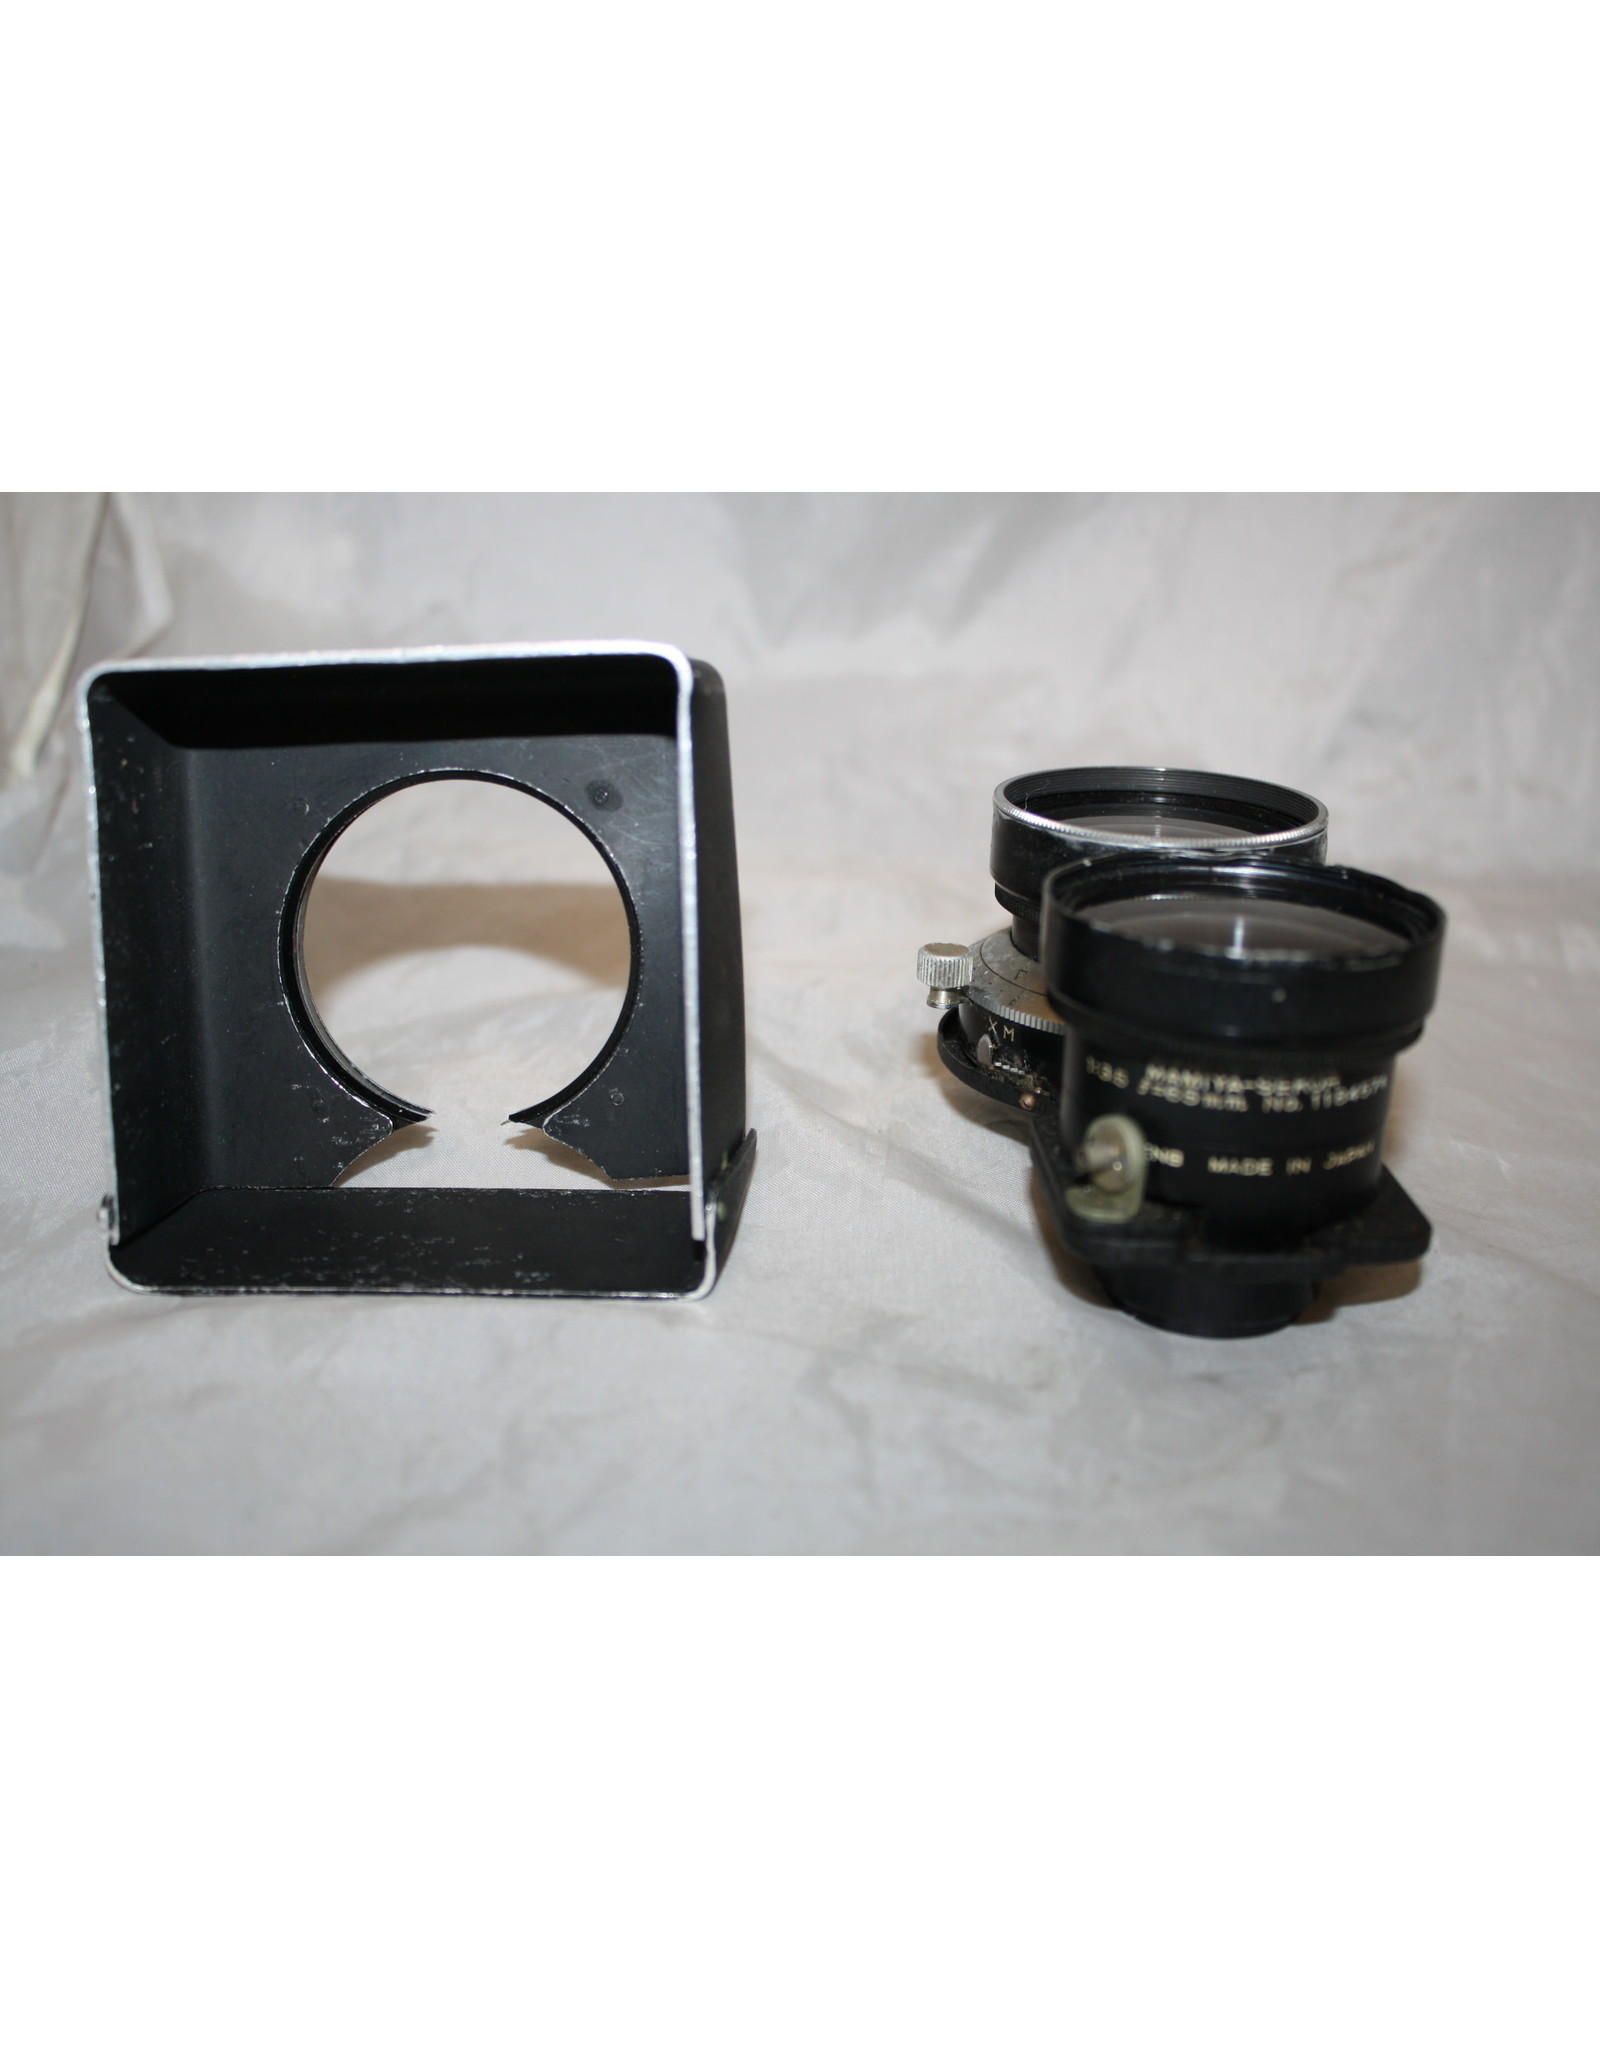 Mamiya-Sekor 65mm f3.5 Lens for C330 TLR with hood